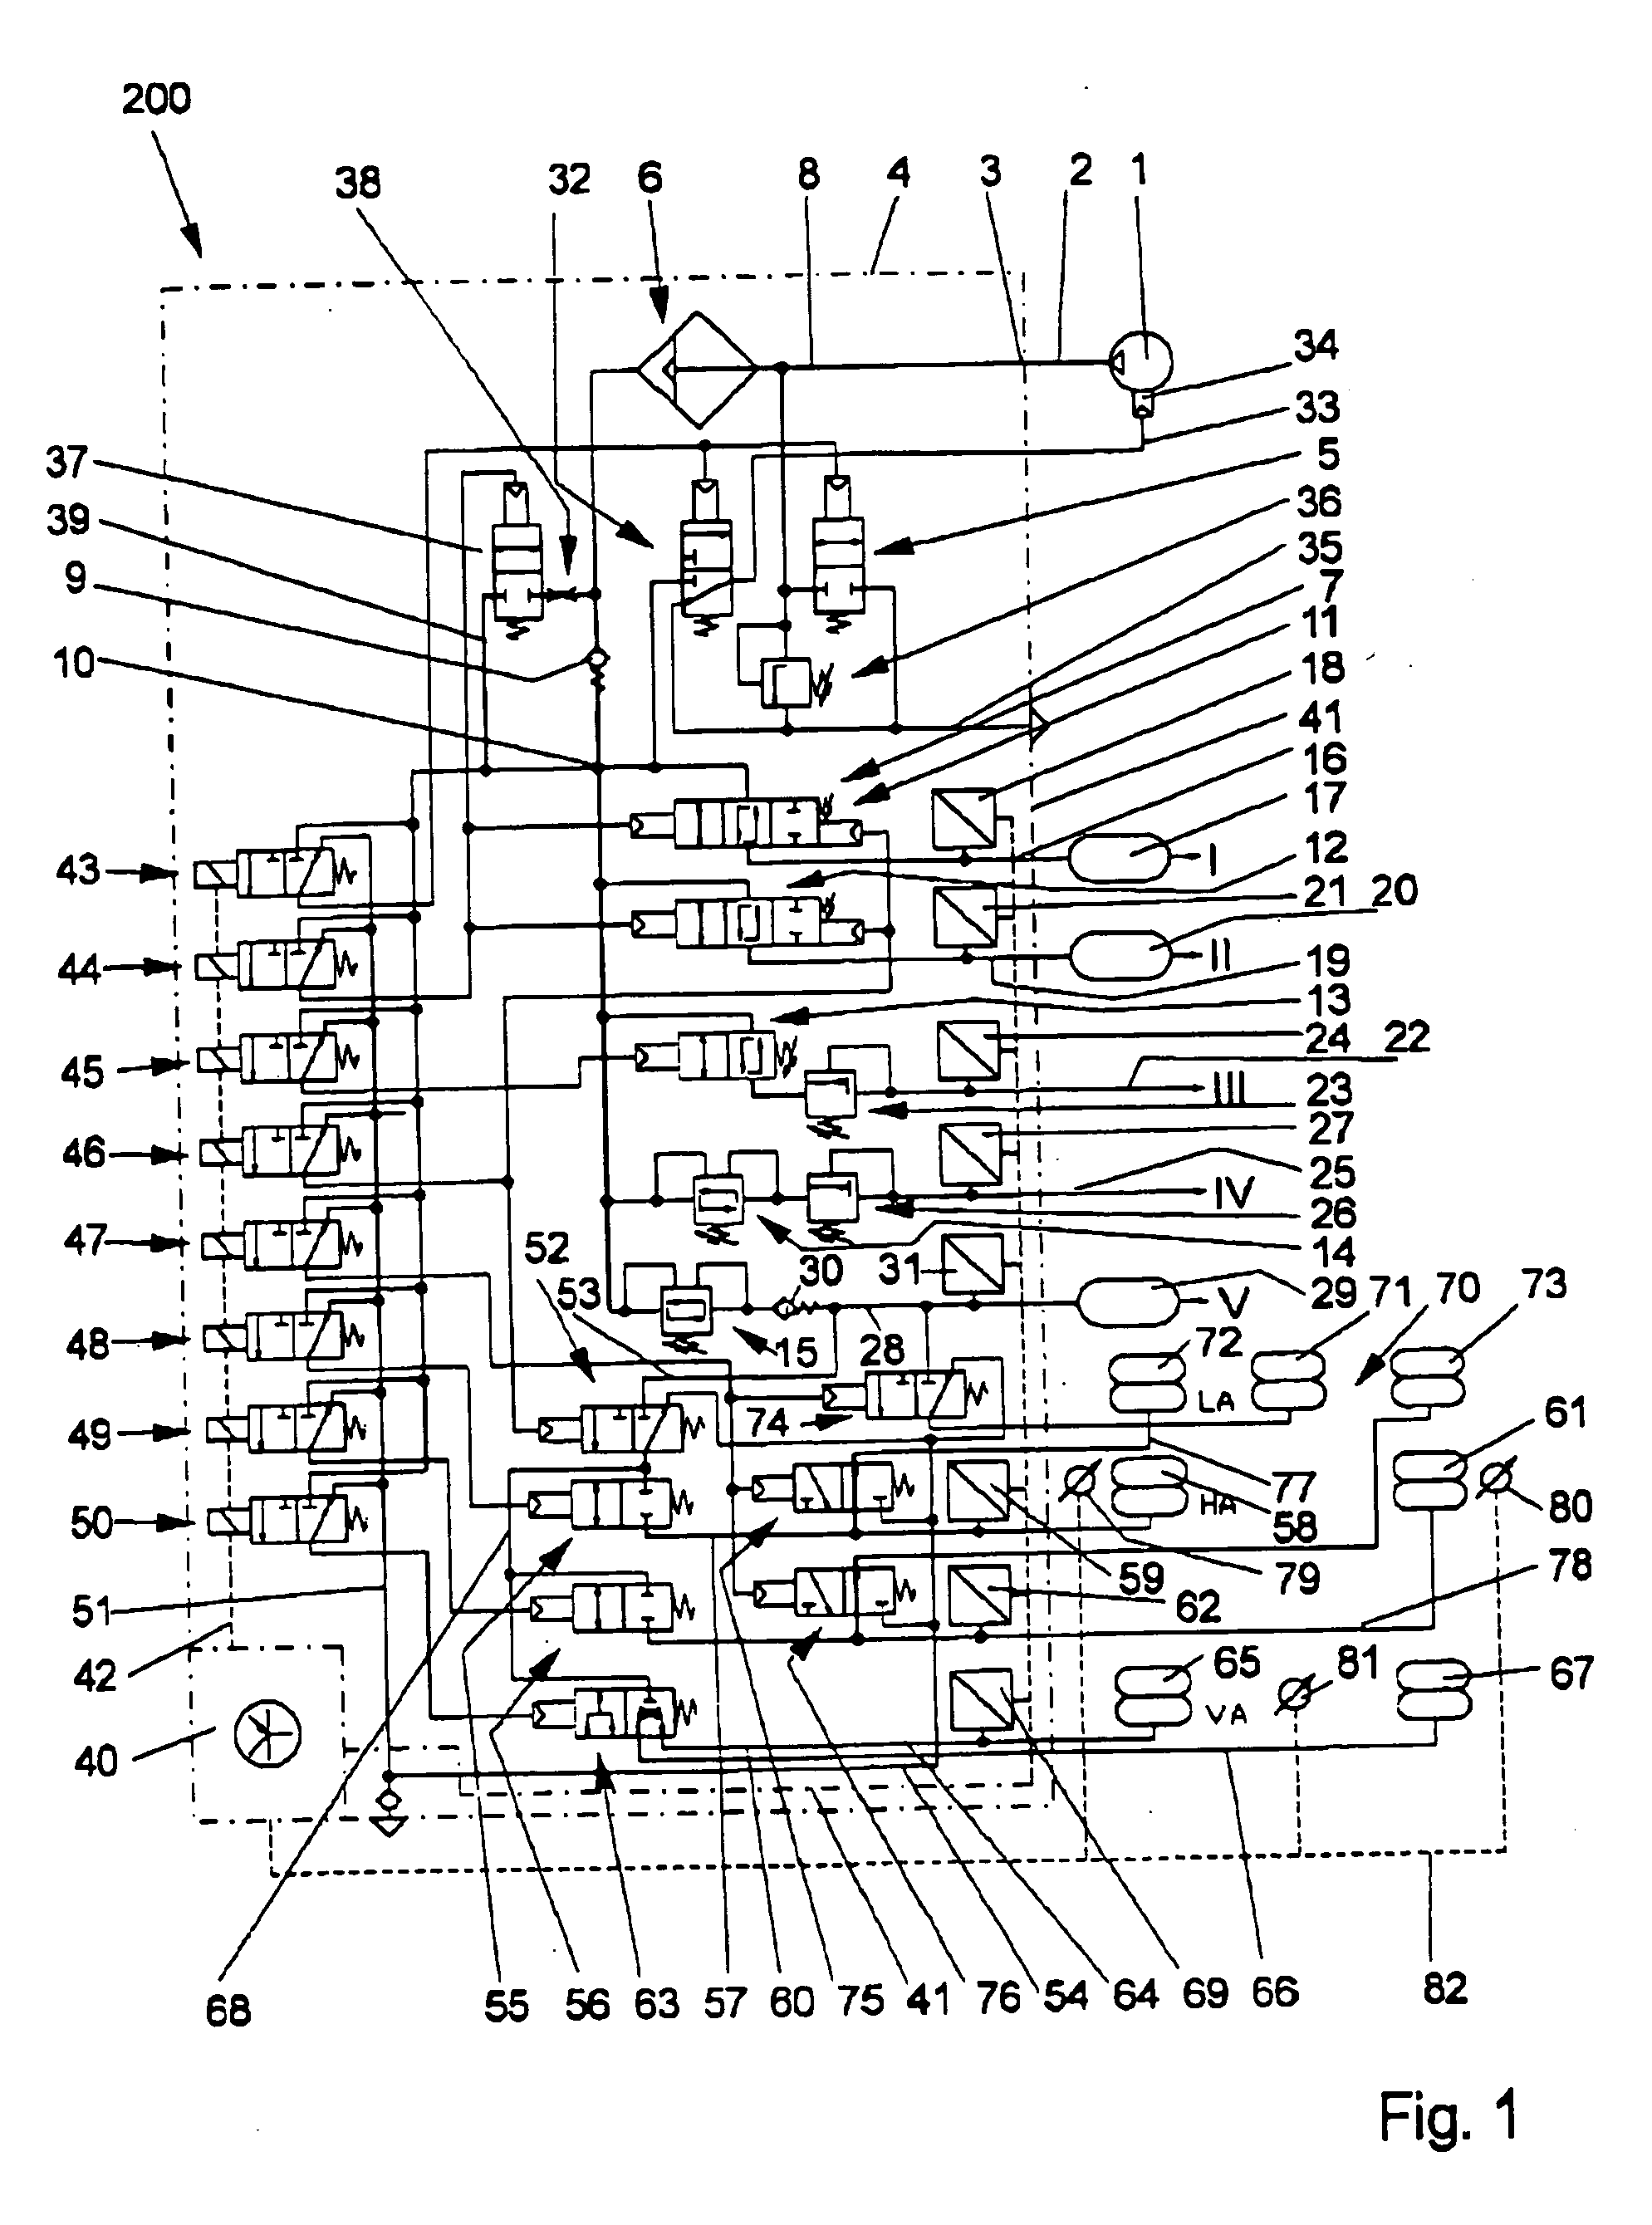 Compressed air processing apparatus for compressed air systems of motor vehicles